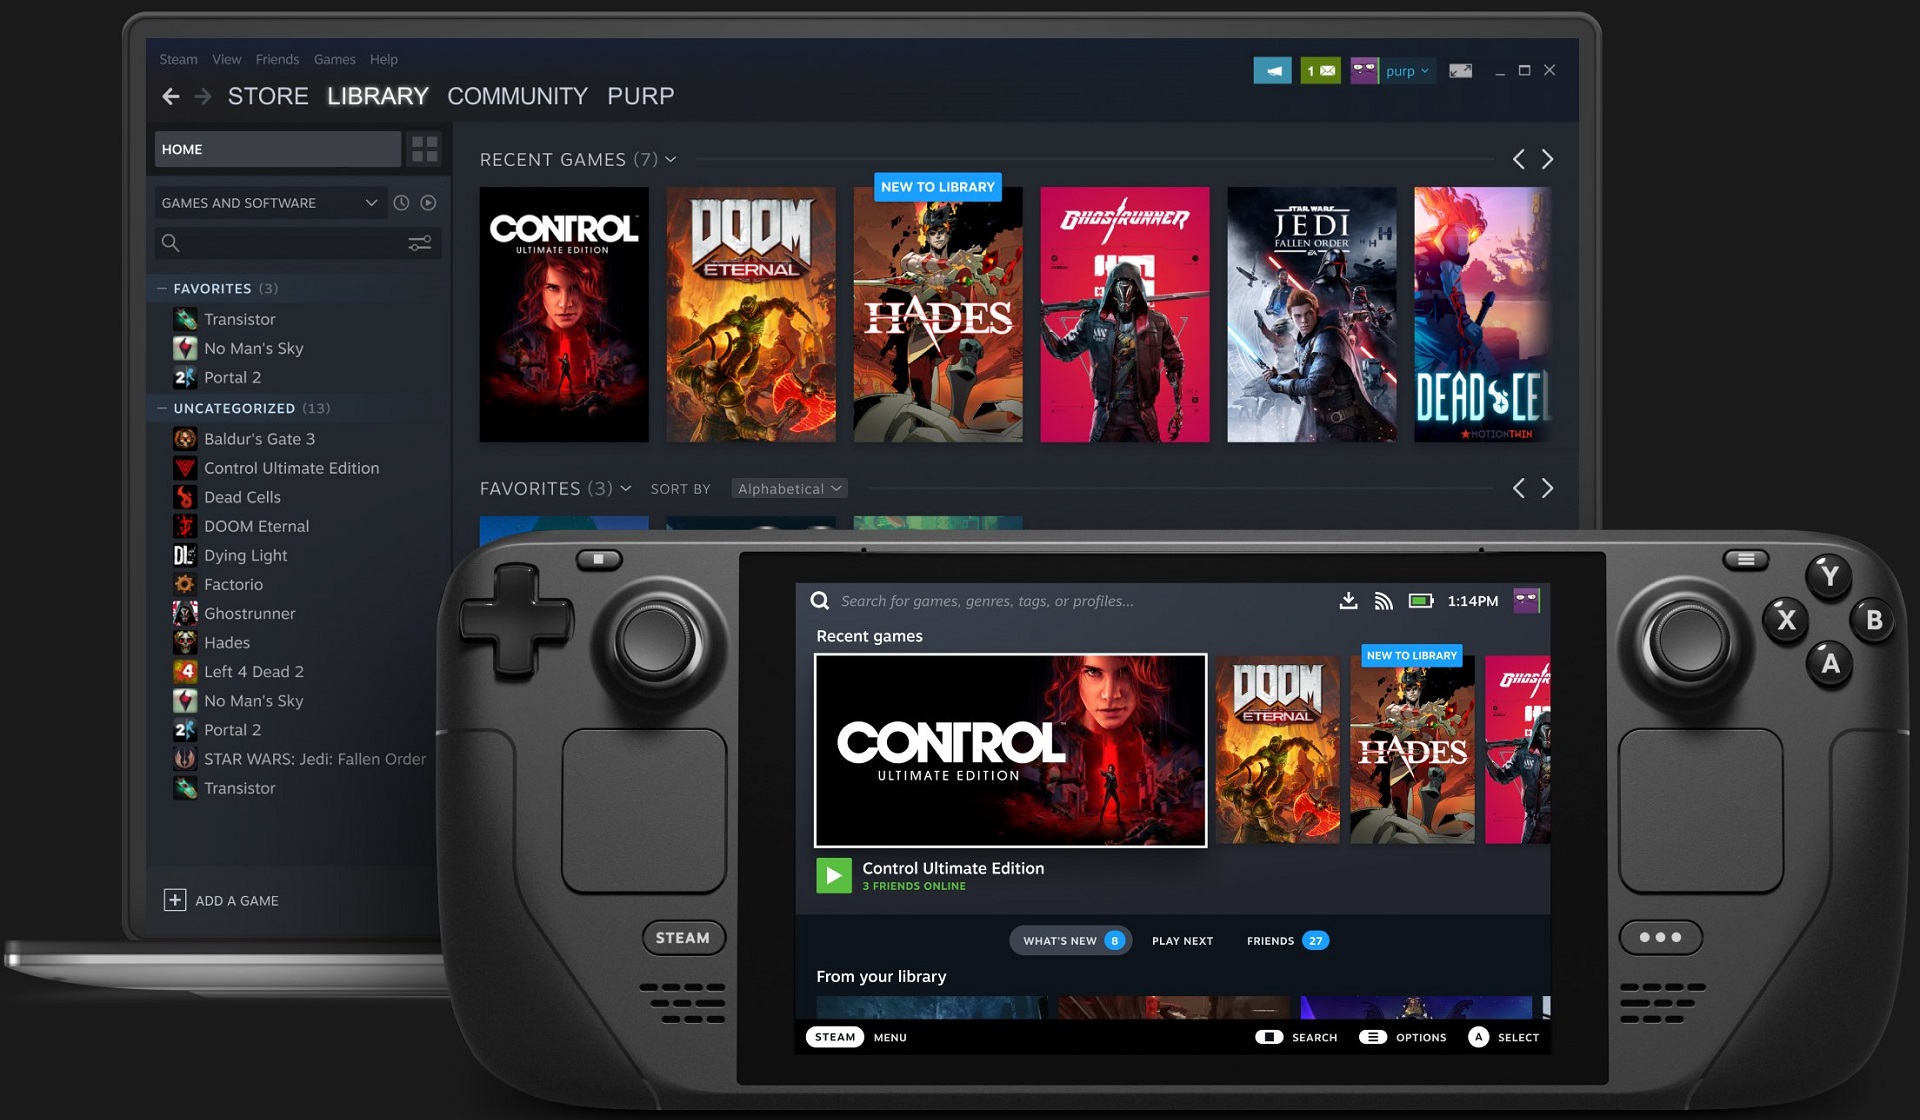 How to use the Steam Deck as a game emulator - Reviewed